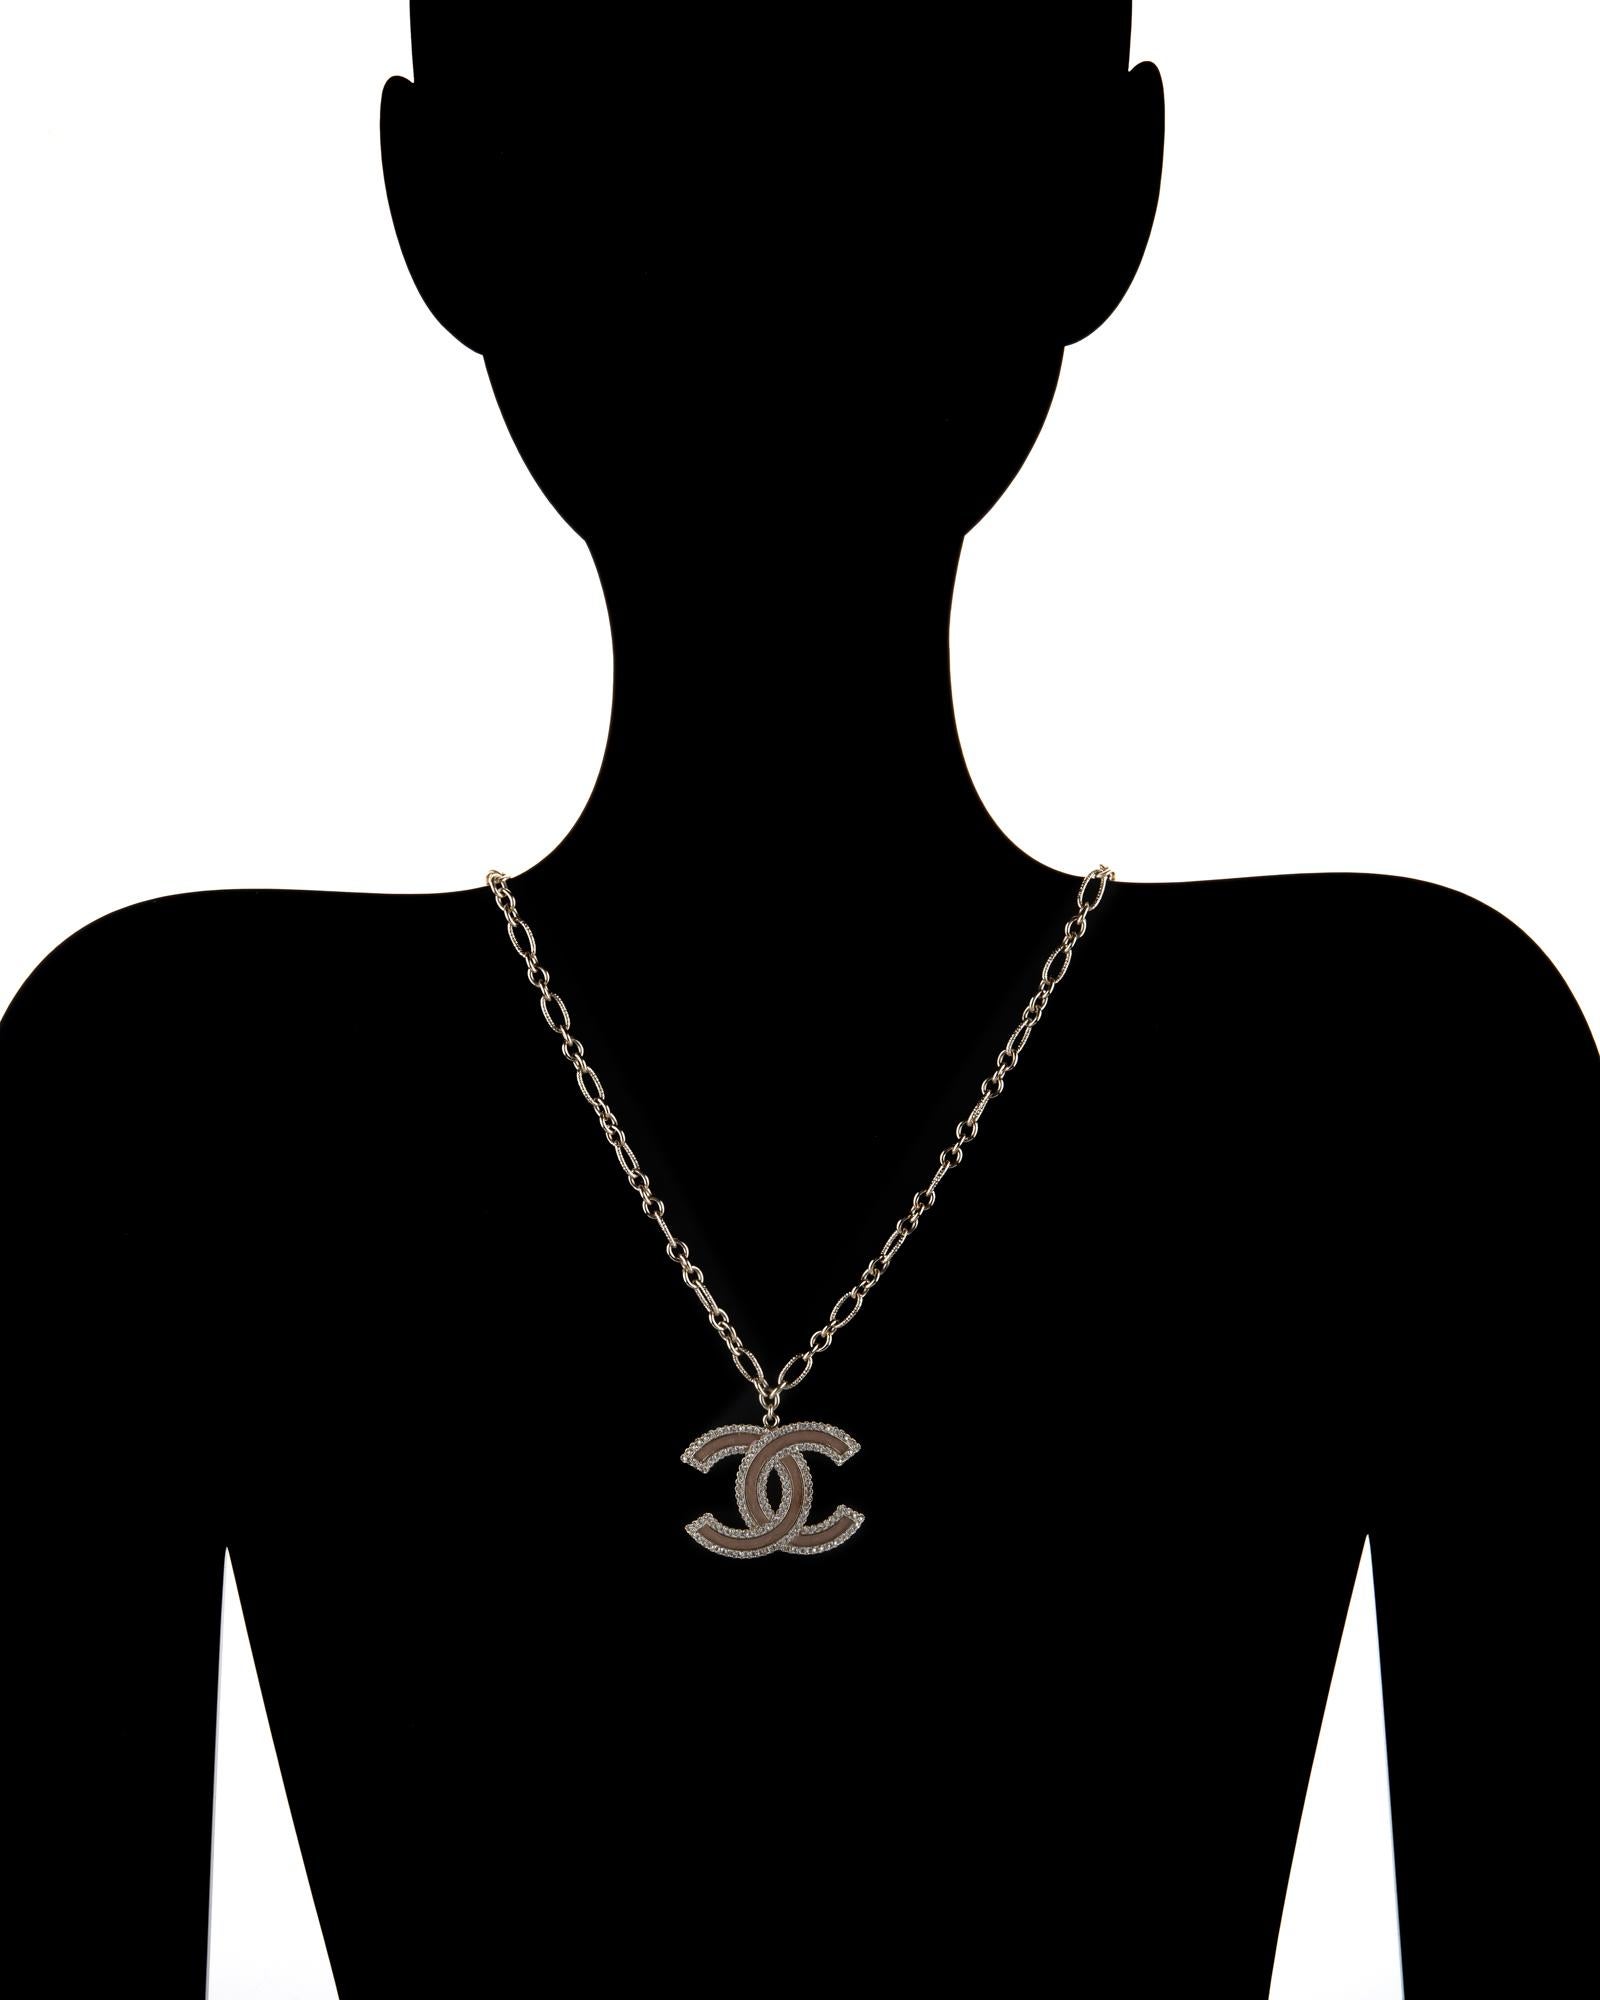 Stylish Chanel Double C logo crystal necklace crafted in light yellow gold tone, circa 2015 

Small 1mm faceted crystals are set into the double C's. The crystals are in-tact and in excellent condition (free of cracks or chips) 

The necklace dates